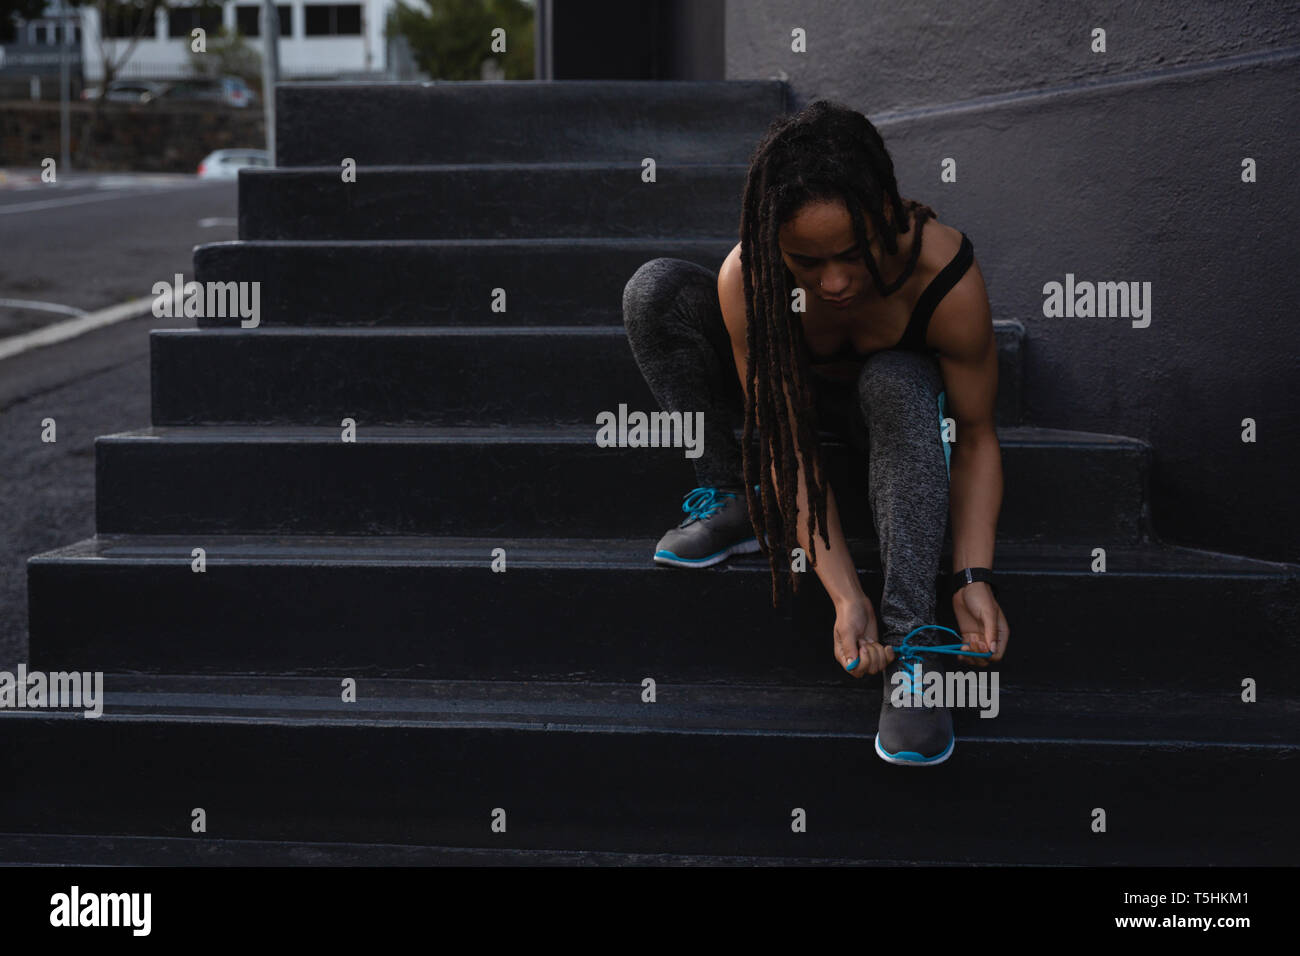 Young woman tying her shoelaces on stairs in the city Stock Photo